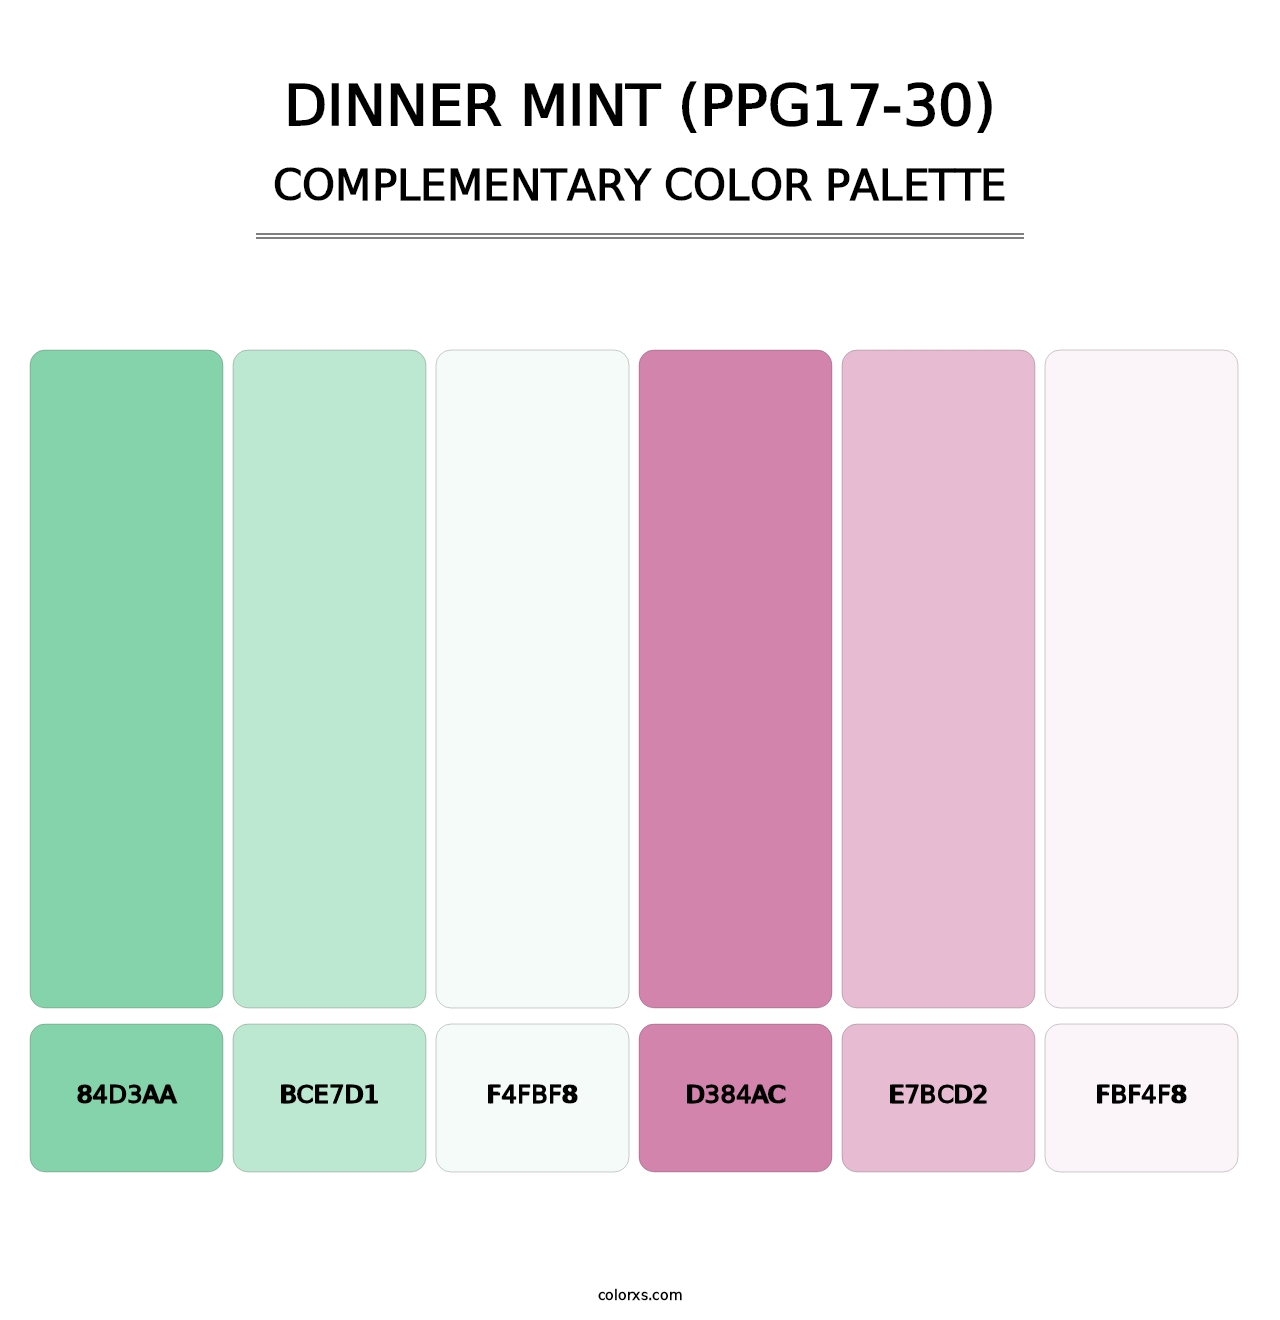 Dinner Mint (PPG17-30) - Complementary Color Palette